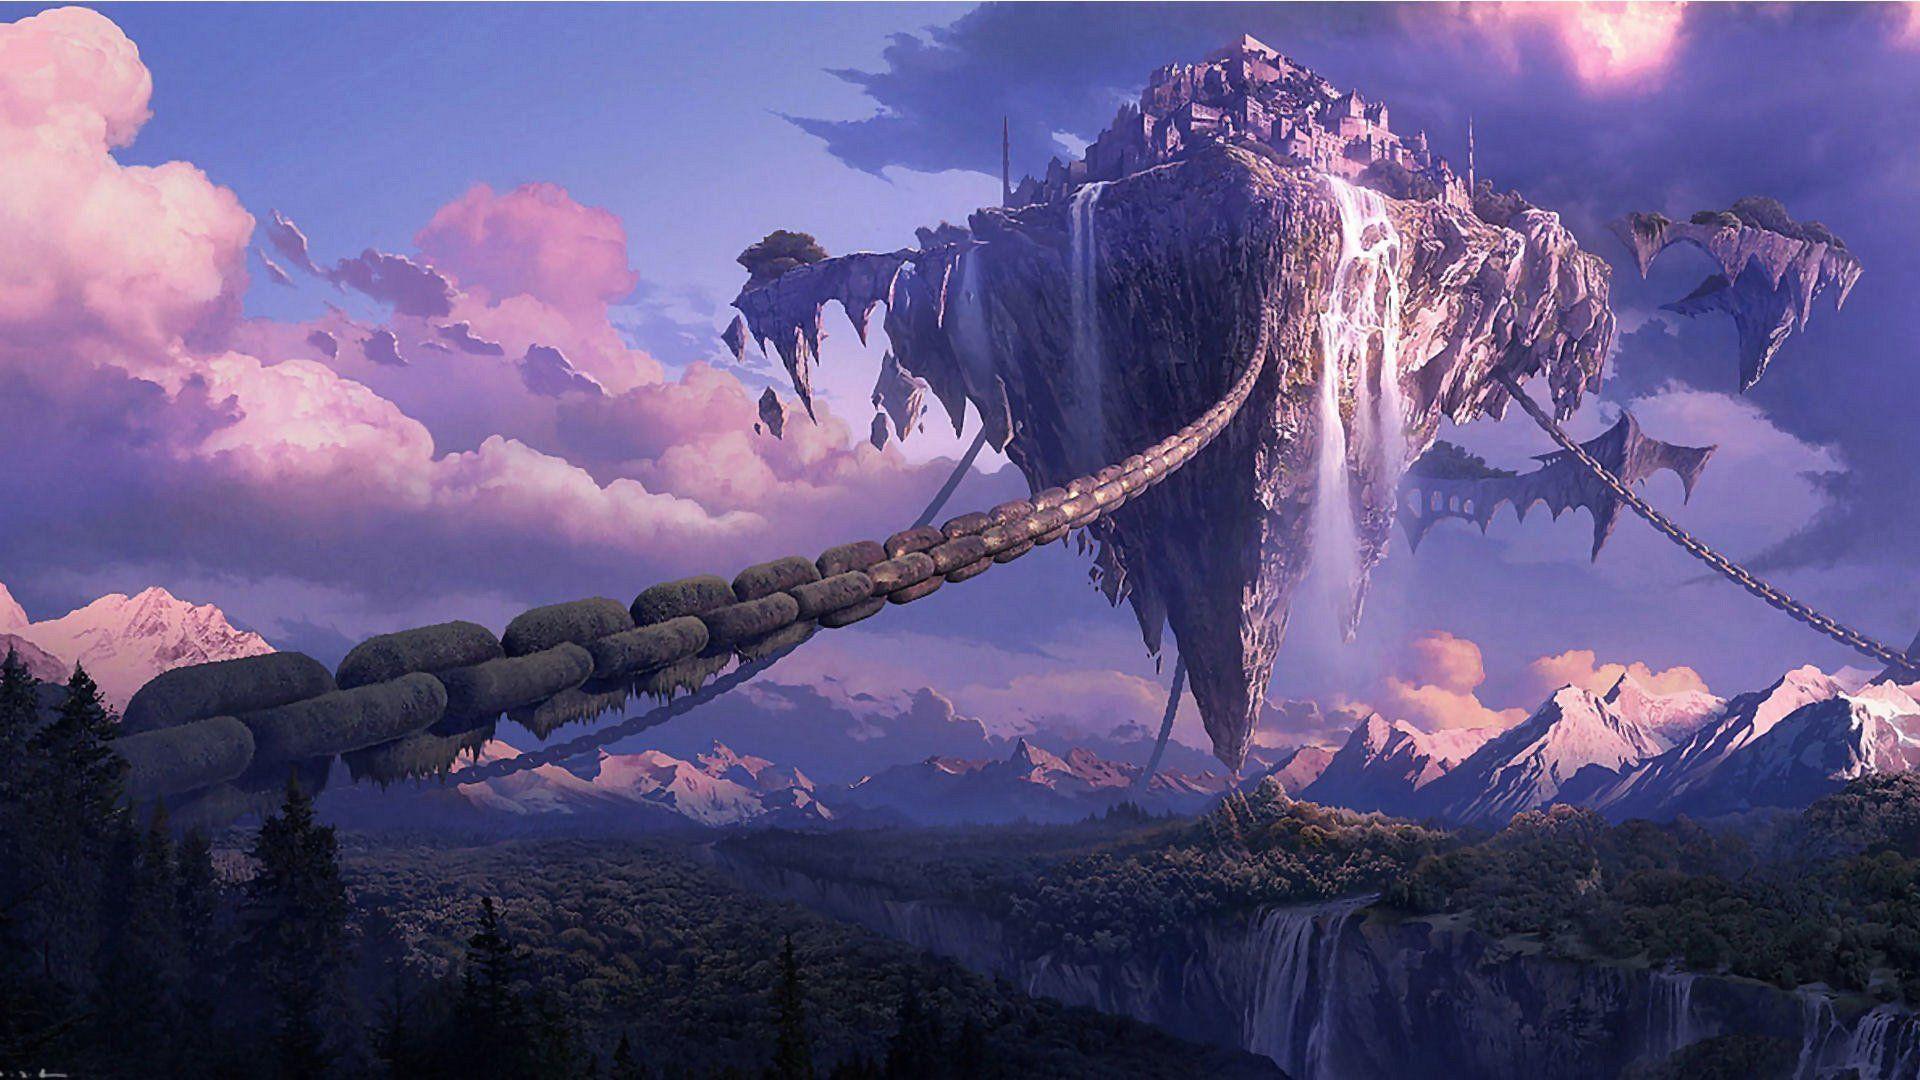 Wallpaper Chained Floating Island Fantasy 1920 X 1080 Full HD